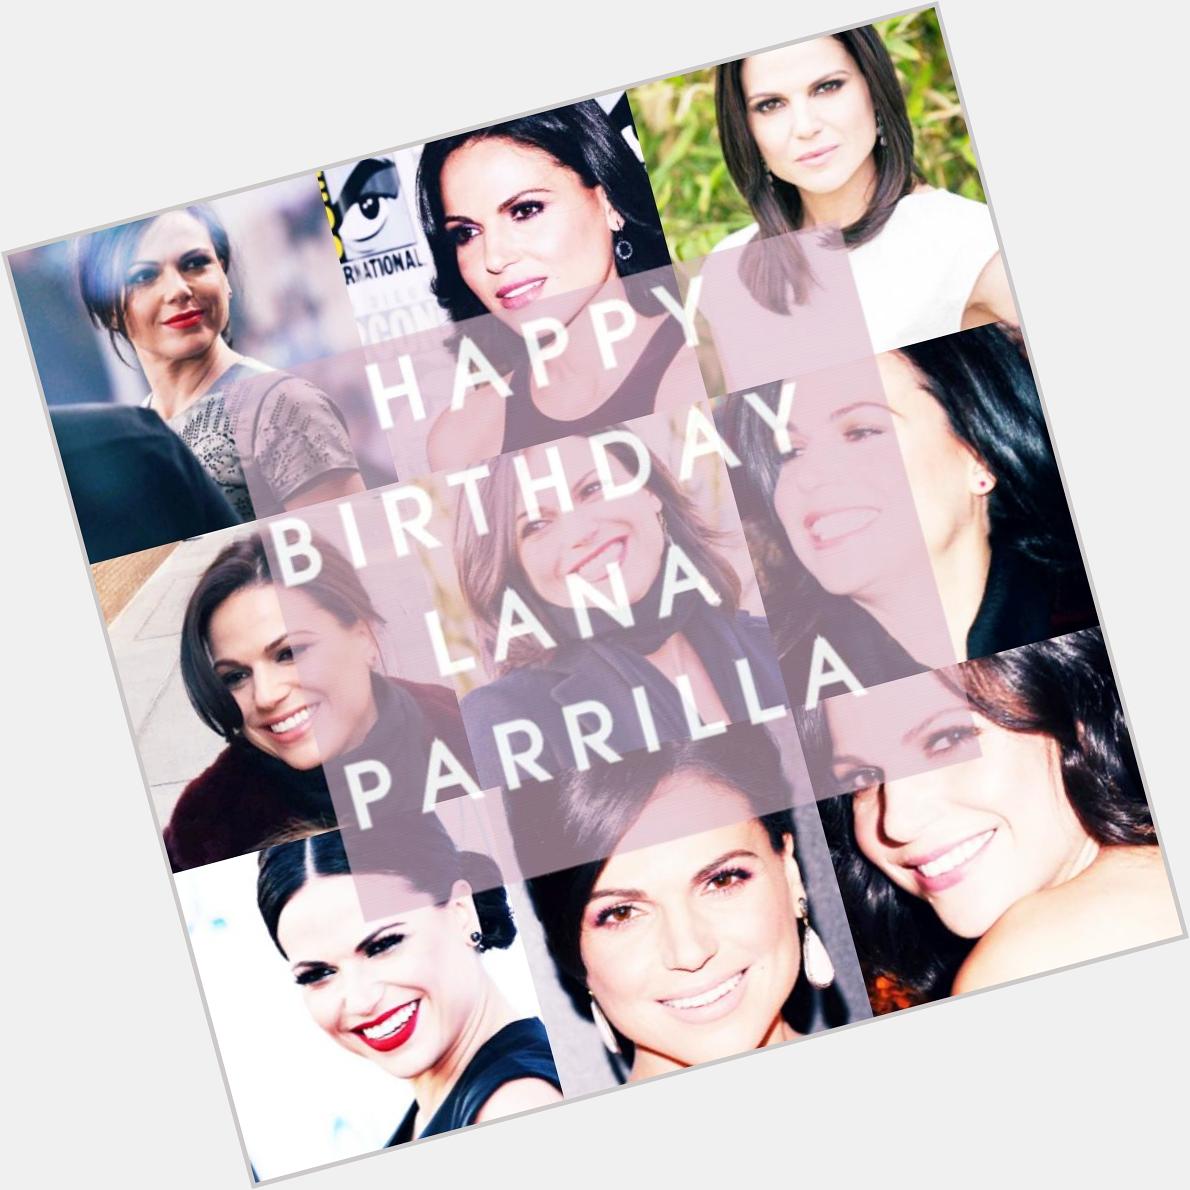 Happy Birthday Lana Parrilla 
The most wonderful,beautiful,incredible,amazing actress&person I have ever knew  